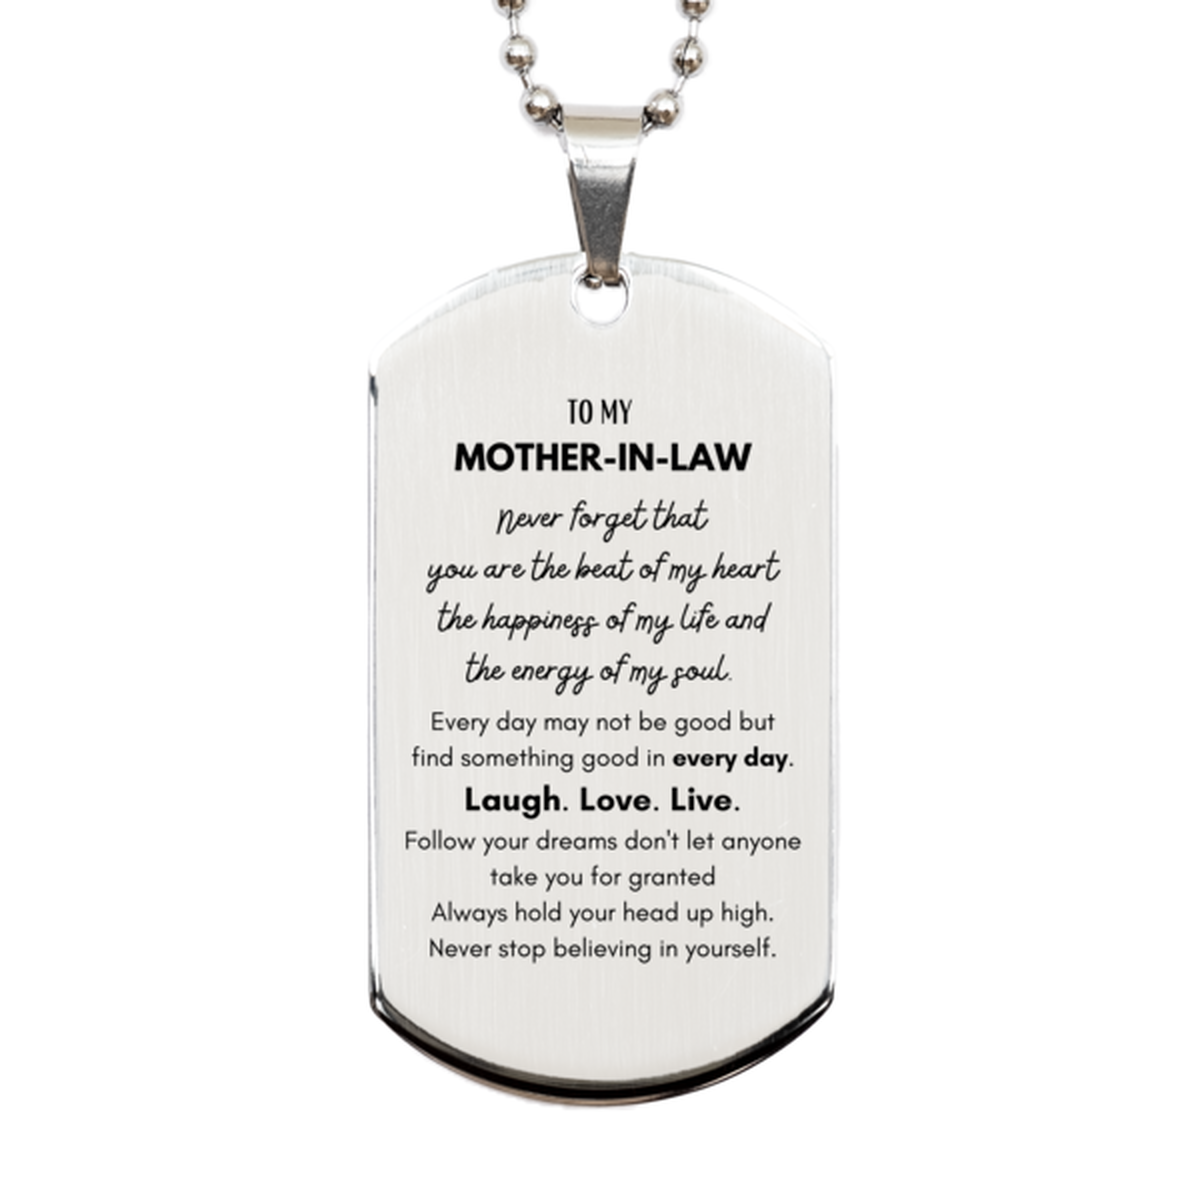 To My Mother-In-Law Dogtag Gifts, Christmas Mother-In-Law Silver Dog Tag Present, Birthday Unique Motivational For Mother-In-Law, To My Mother-In-Law Never forget that you are the beat of my heart the happiness of my life and the energy of my soul